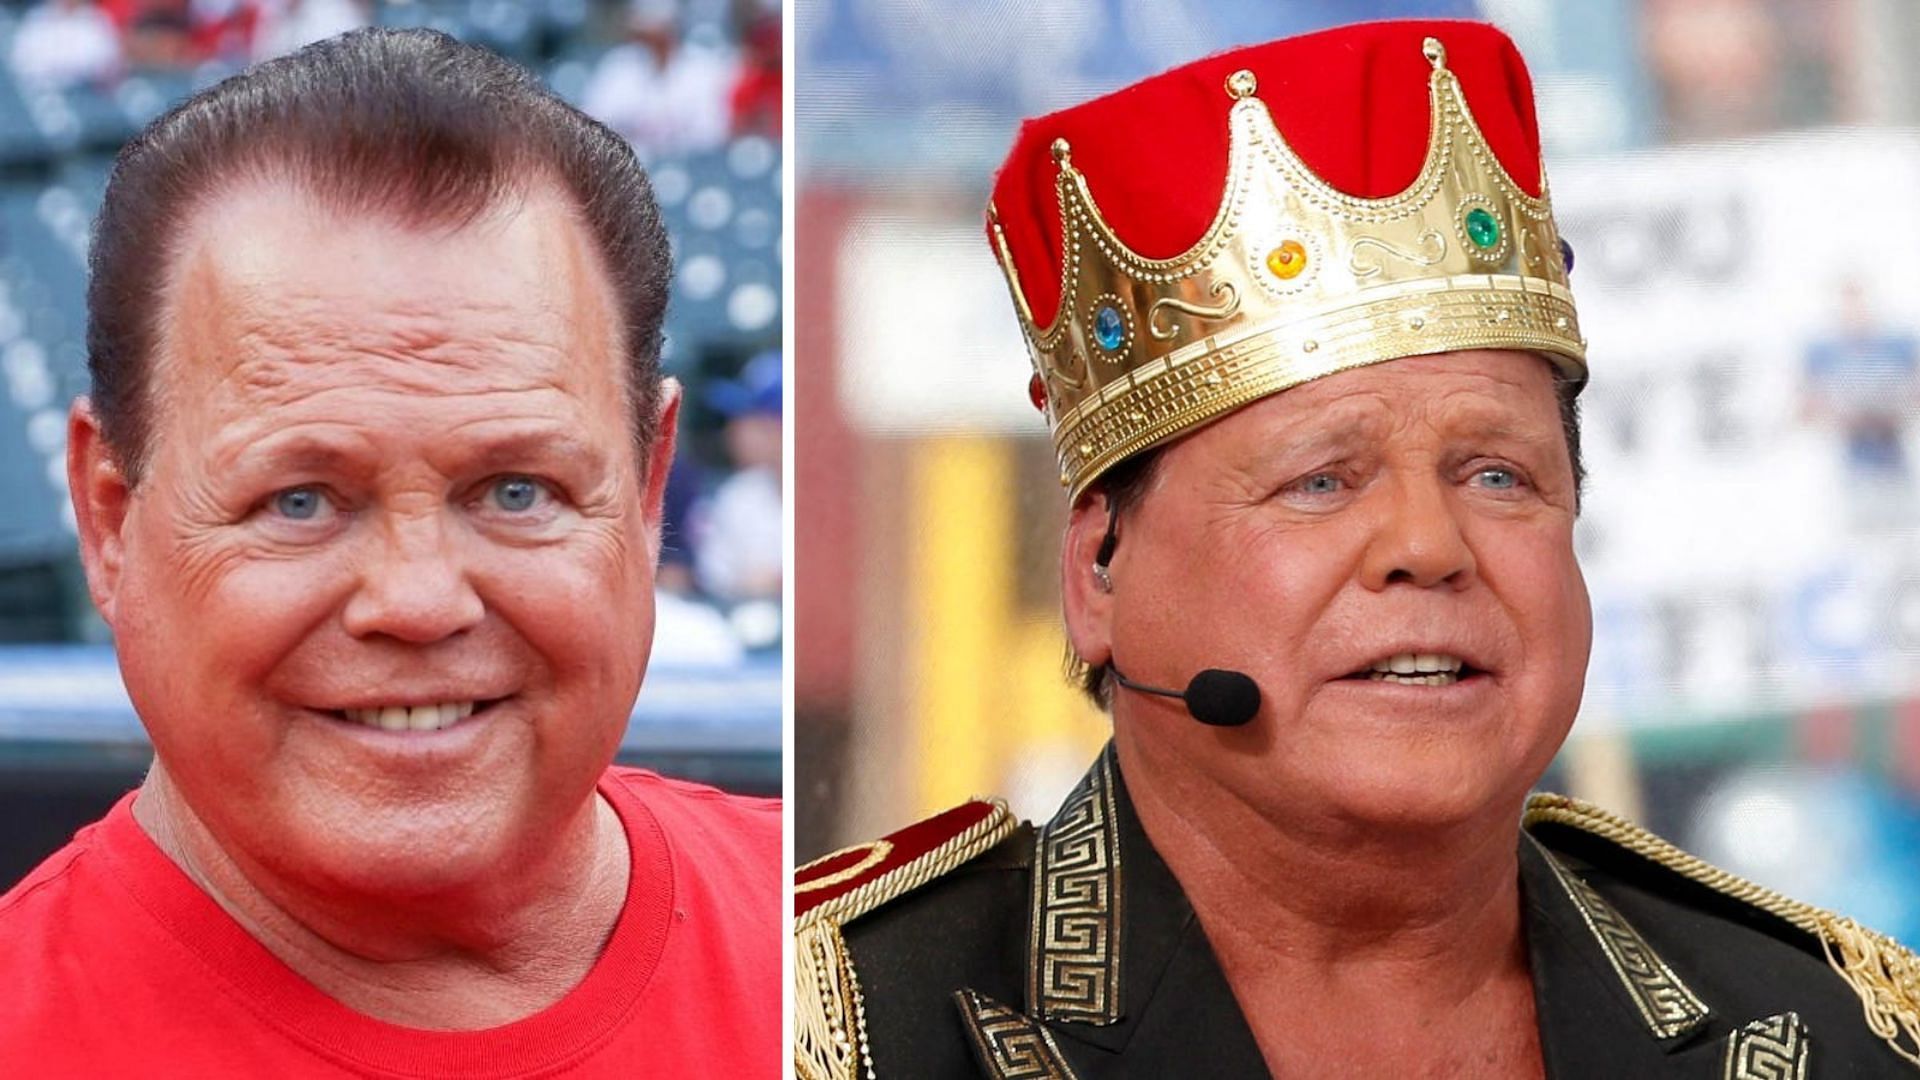 WWE Hall of Famer Jerry Lawler suffered a medical emergency recently.